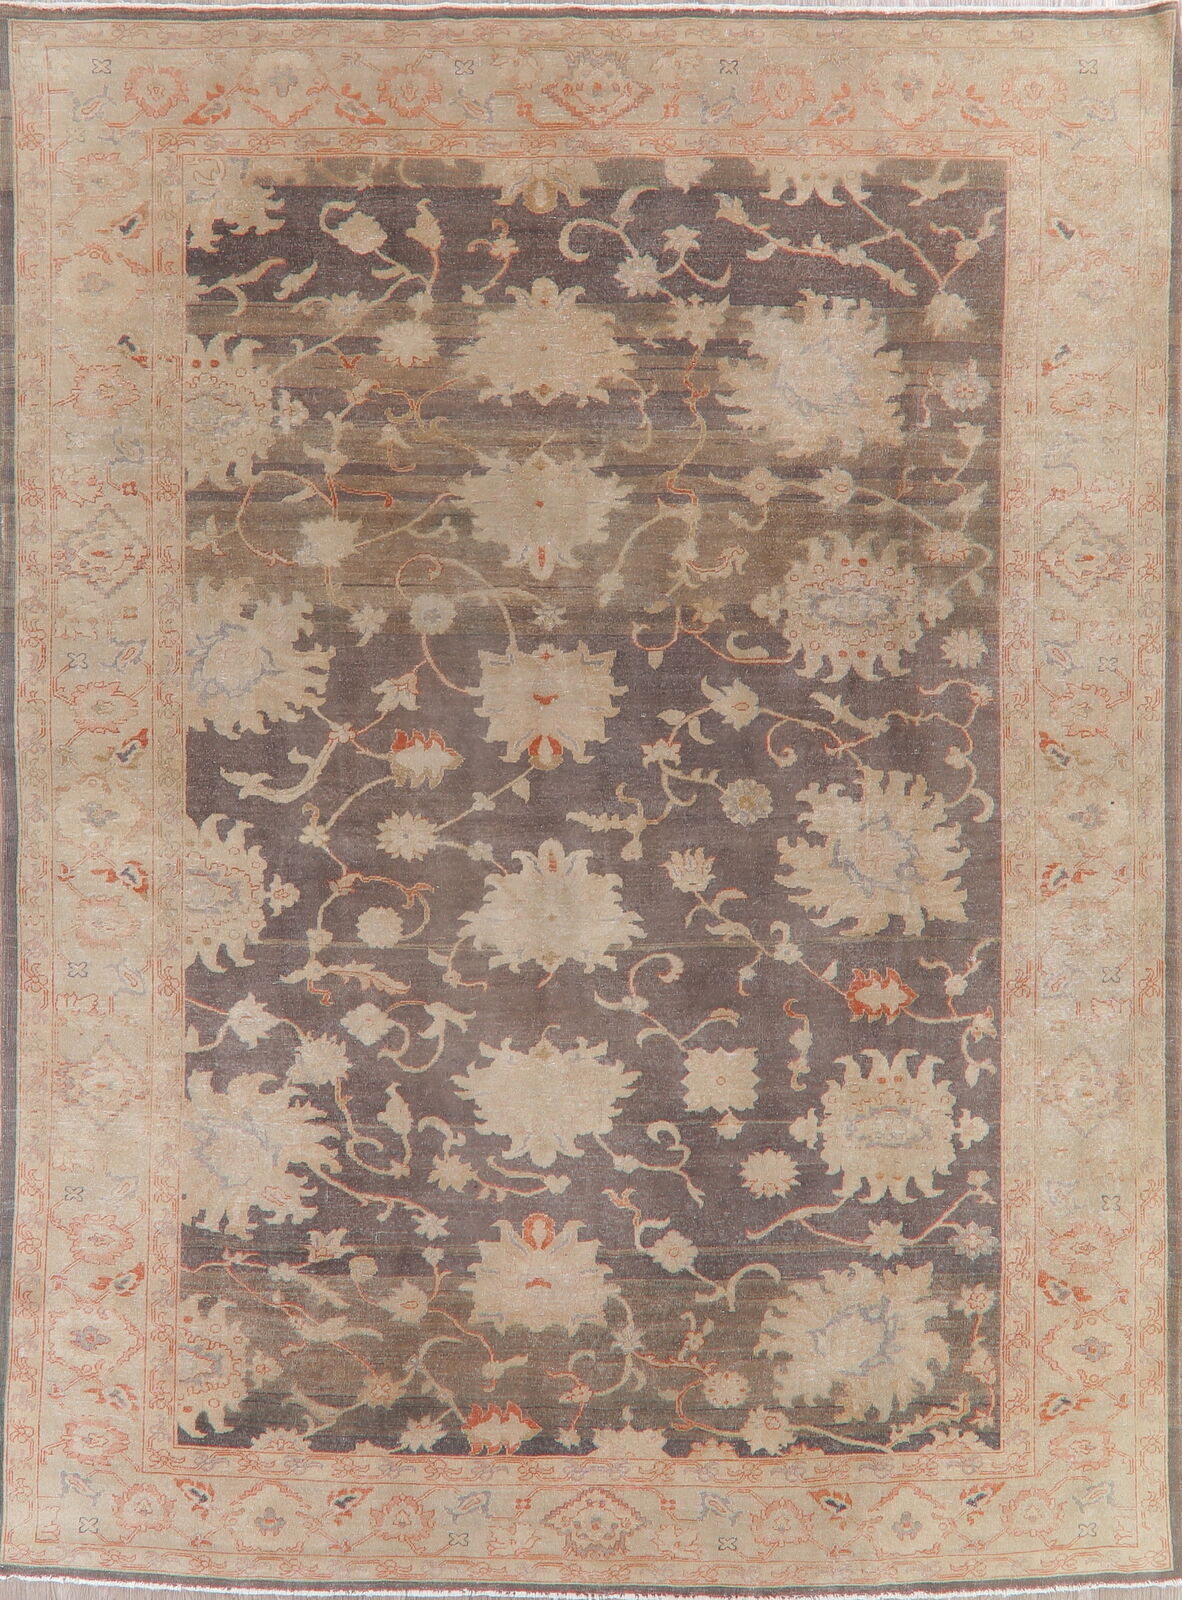 Antique Floral Oushak Oriental Area Rug 9x12 Wool Hand-knotted Turkish Carpet